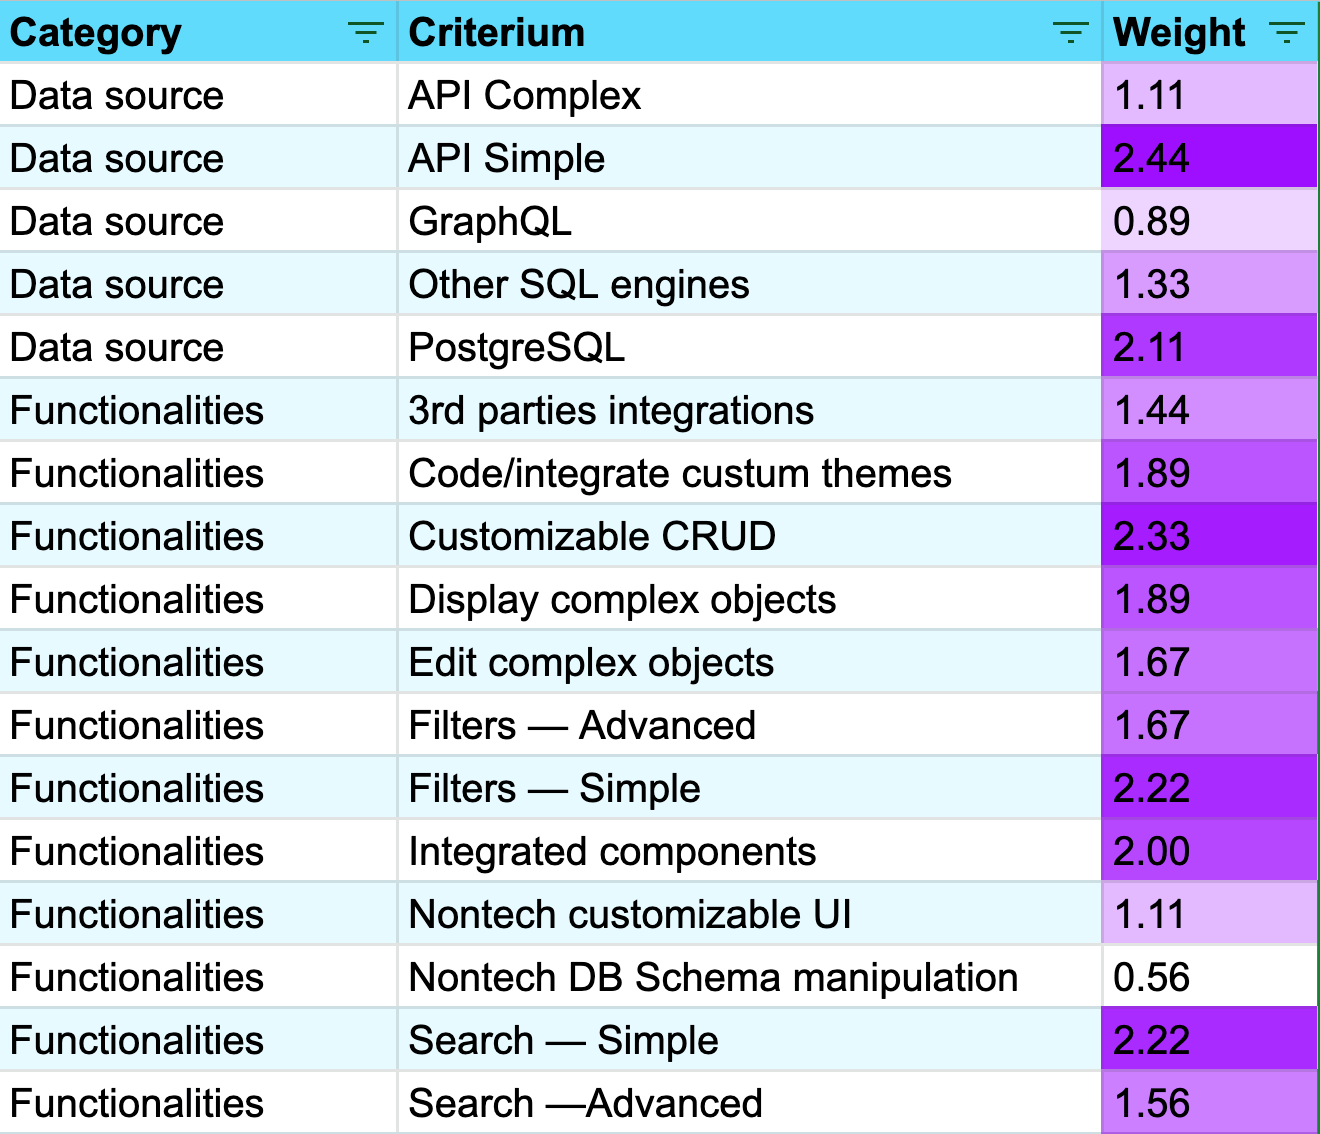 A small part of the assessment criteria, each with an average weight from our teammates’ contributions.